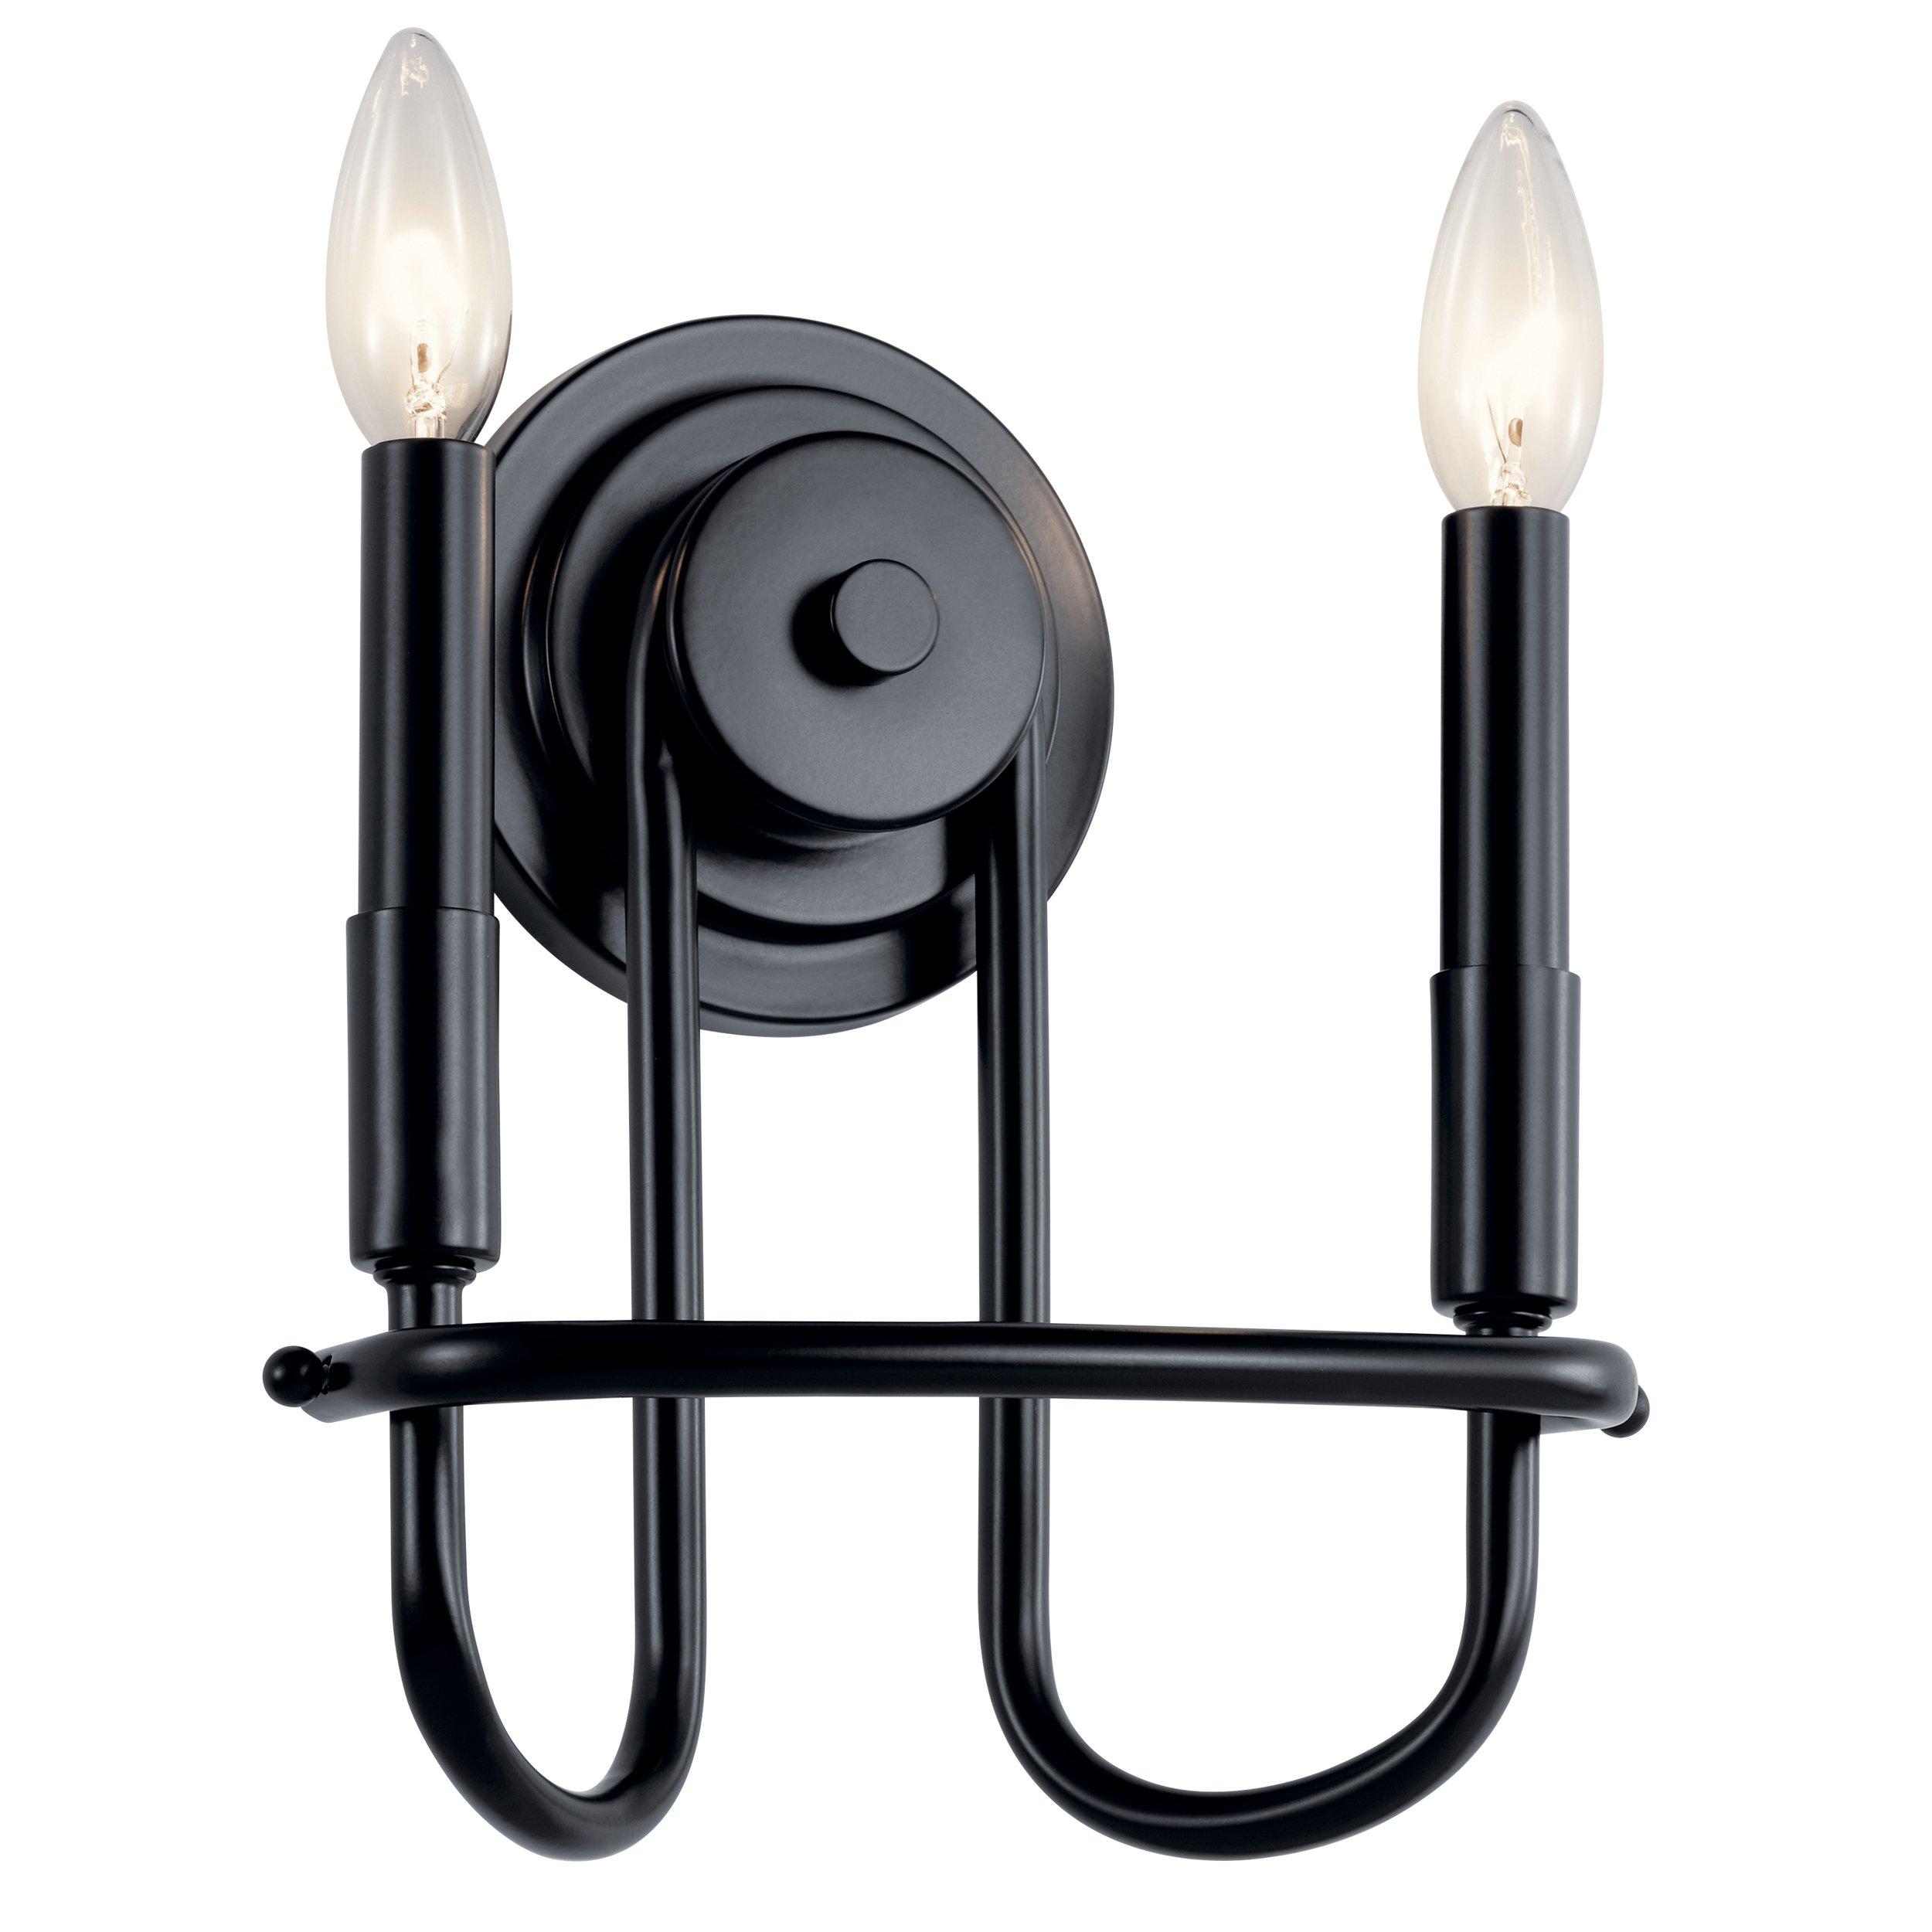 Capital Hill Black Double Sconce